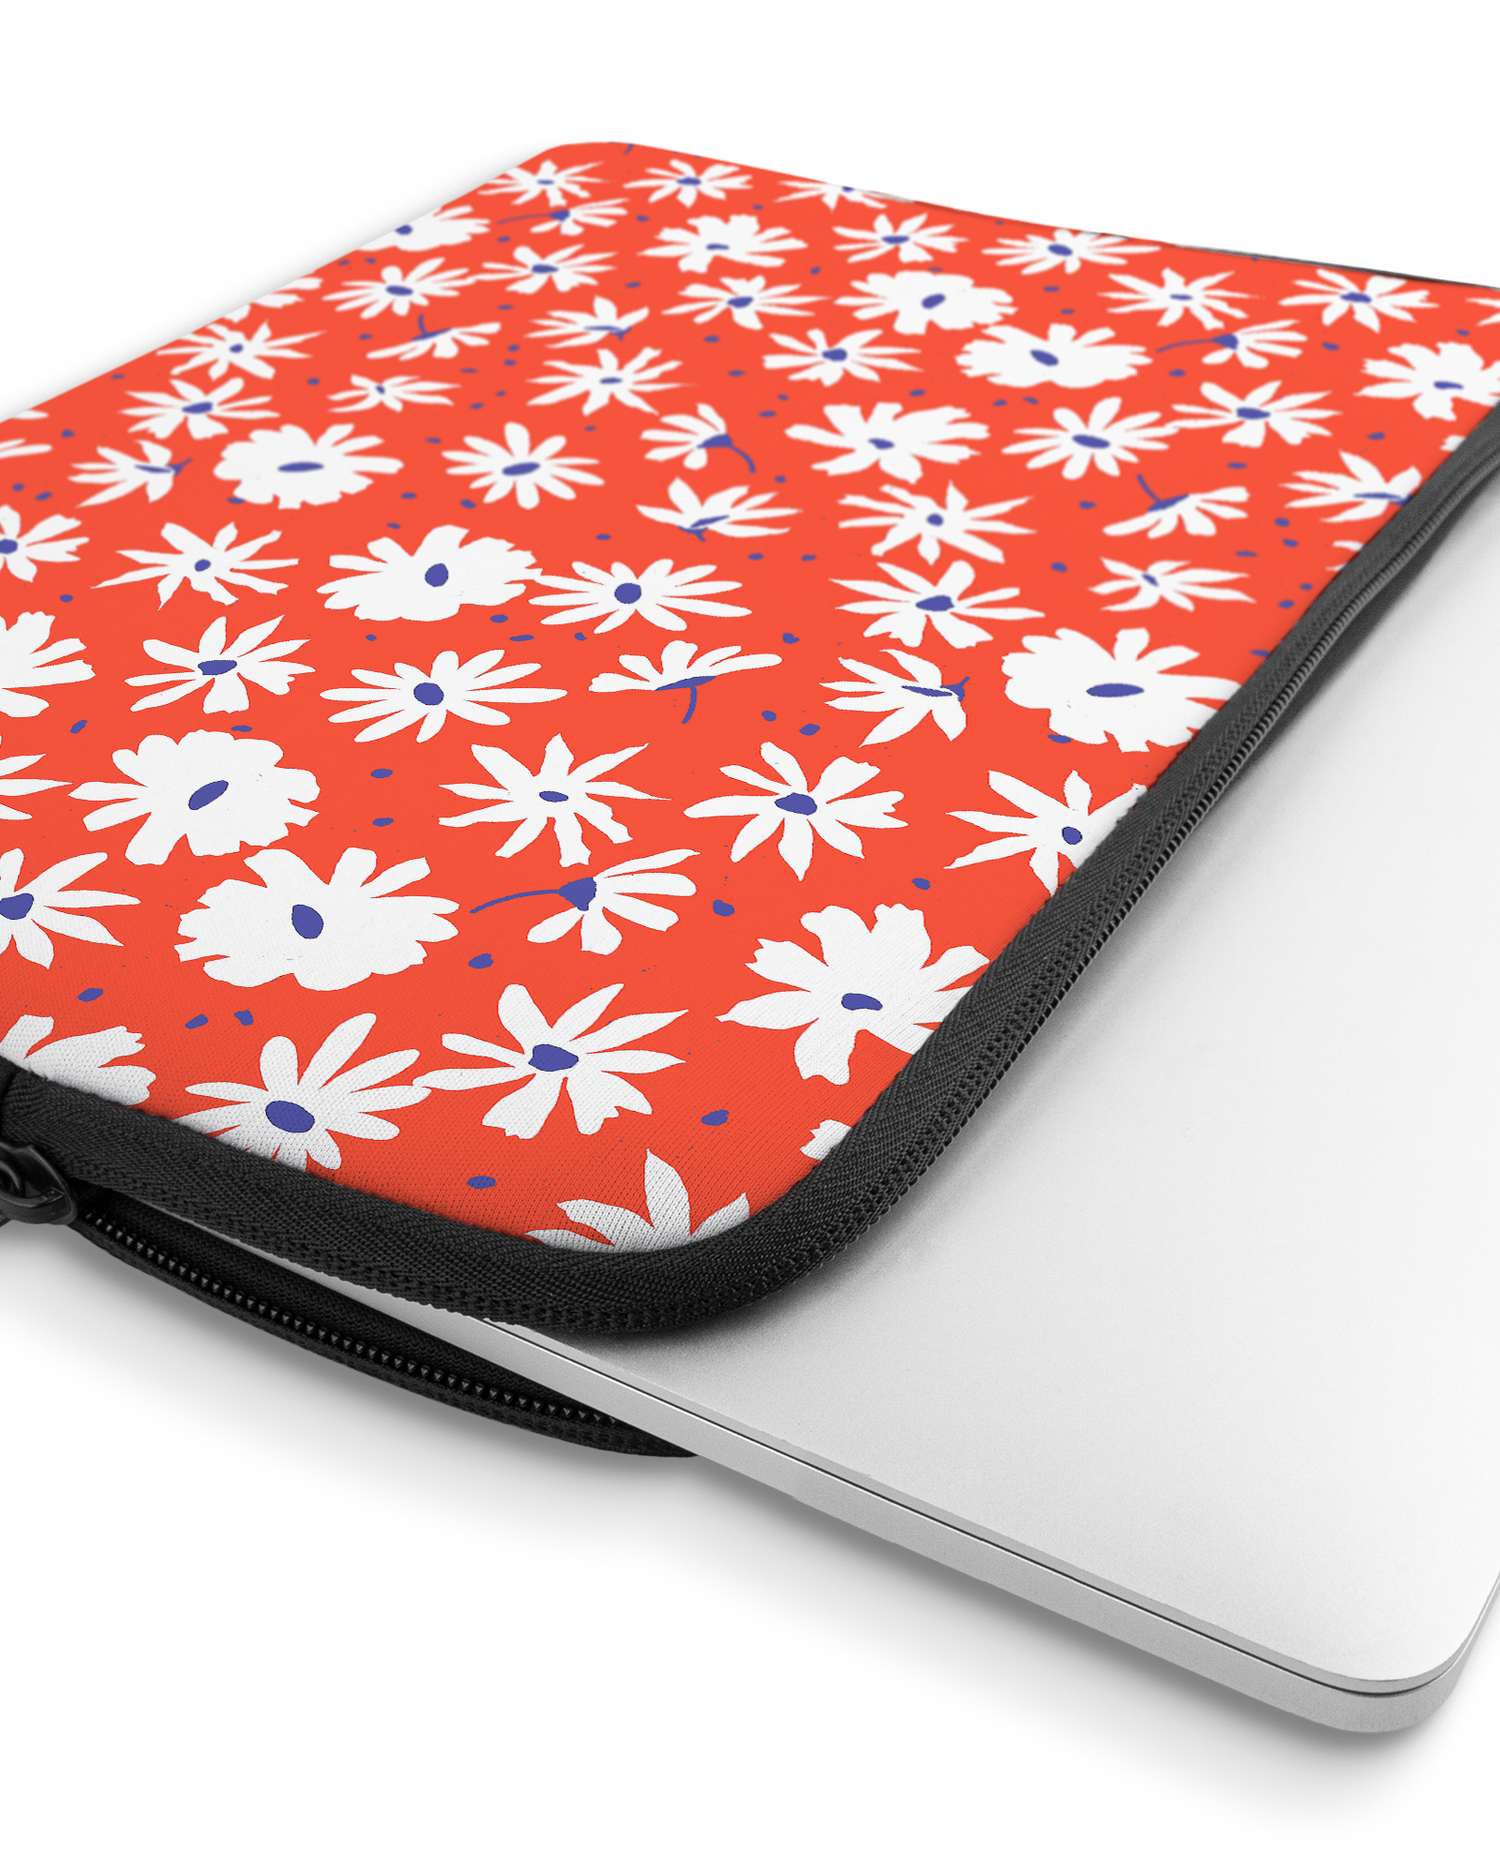 Retro Daisy Laptop Case 13 inch with device inside